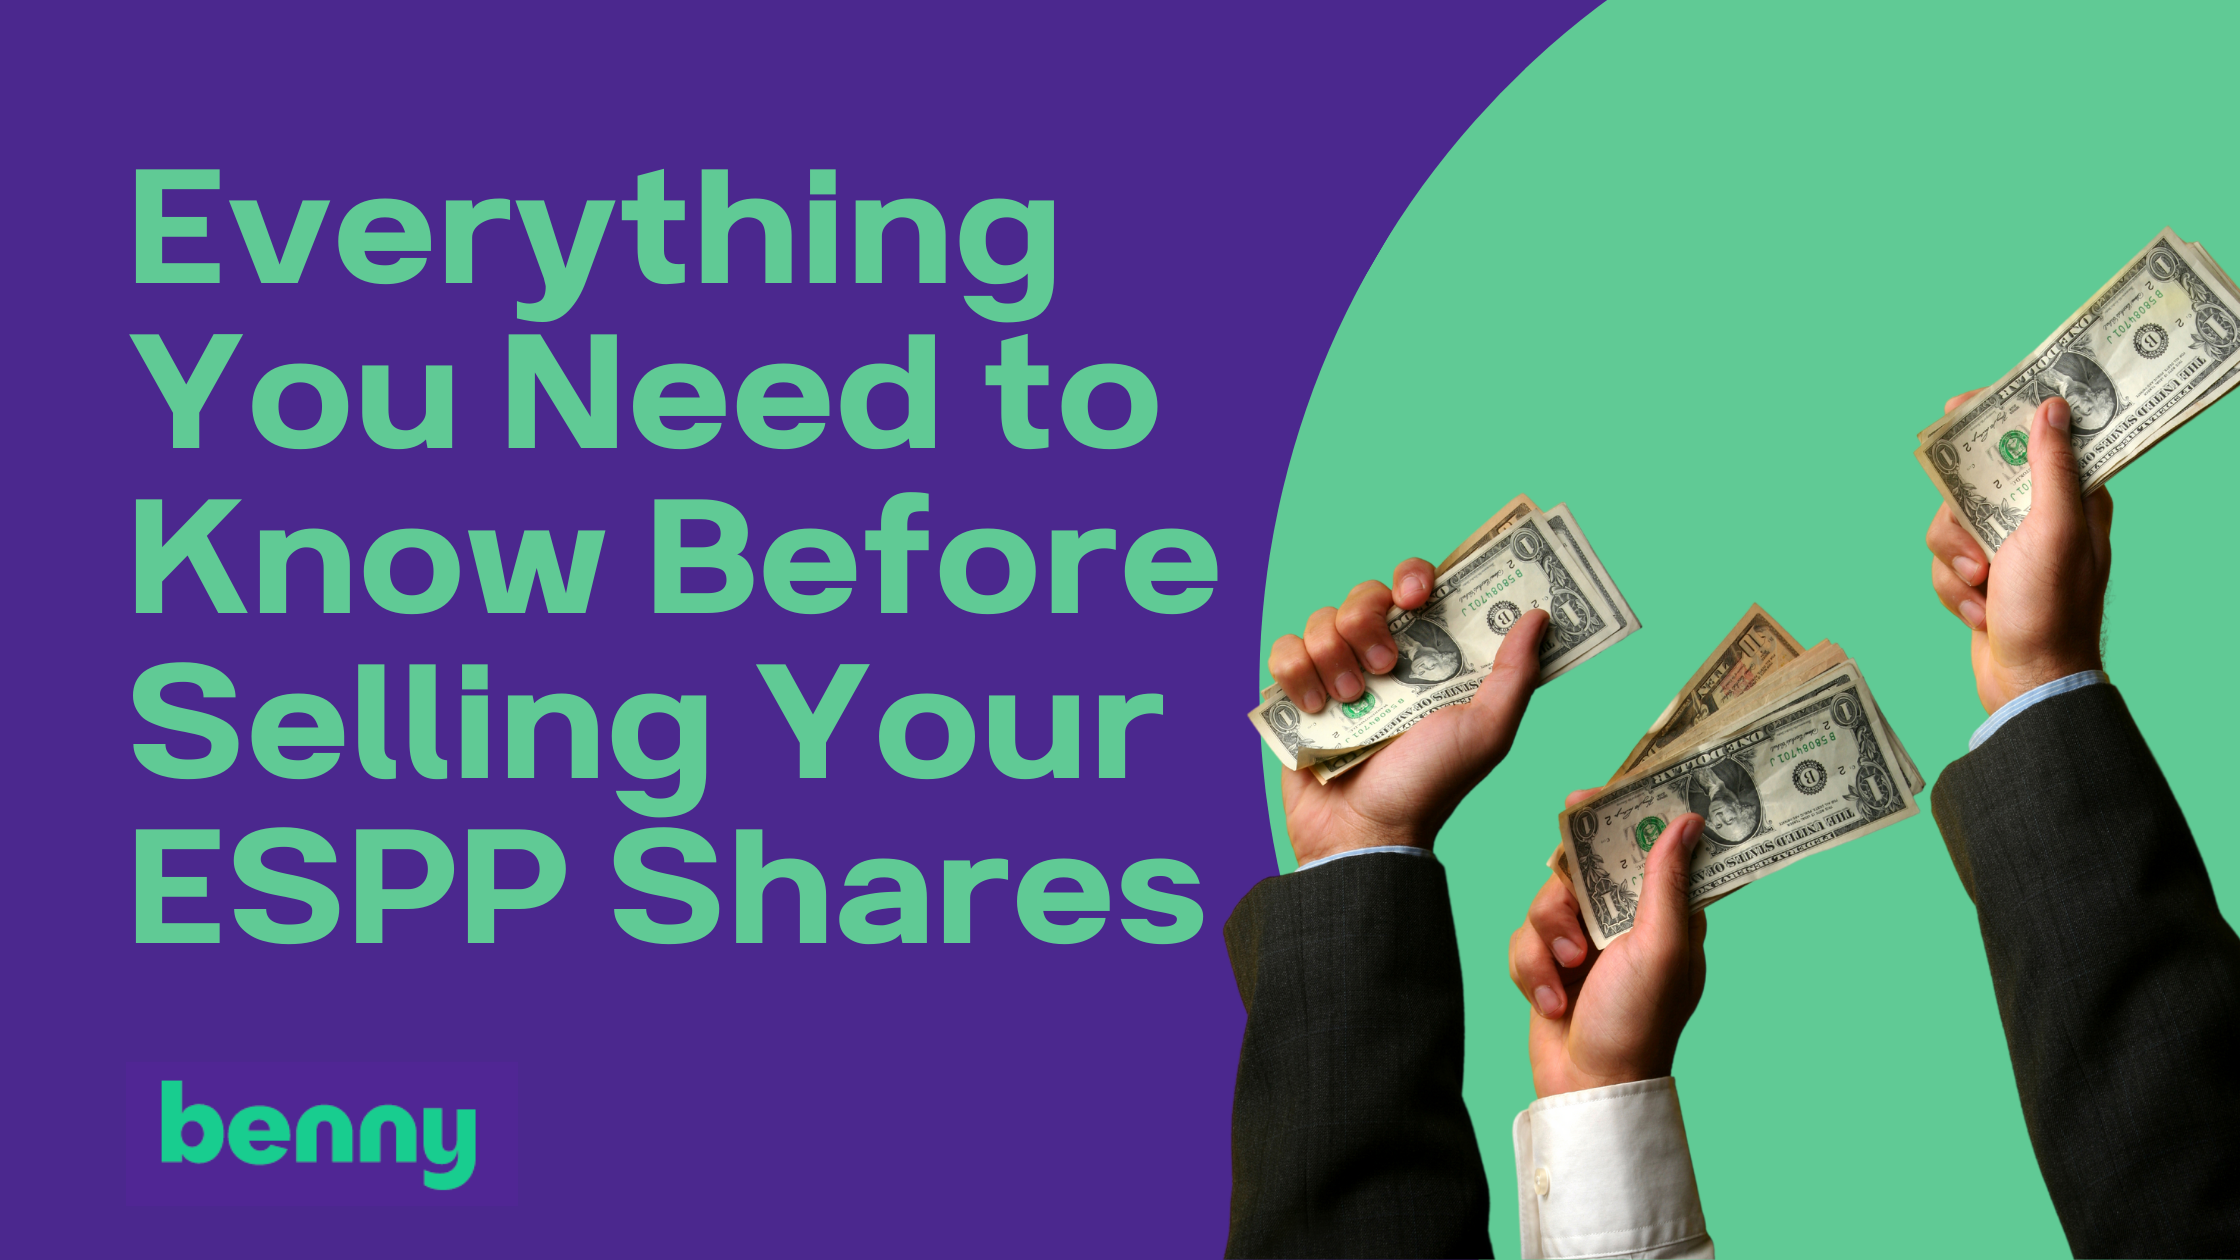 Test stating, everything you need to know before selling your ESPP shares